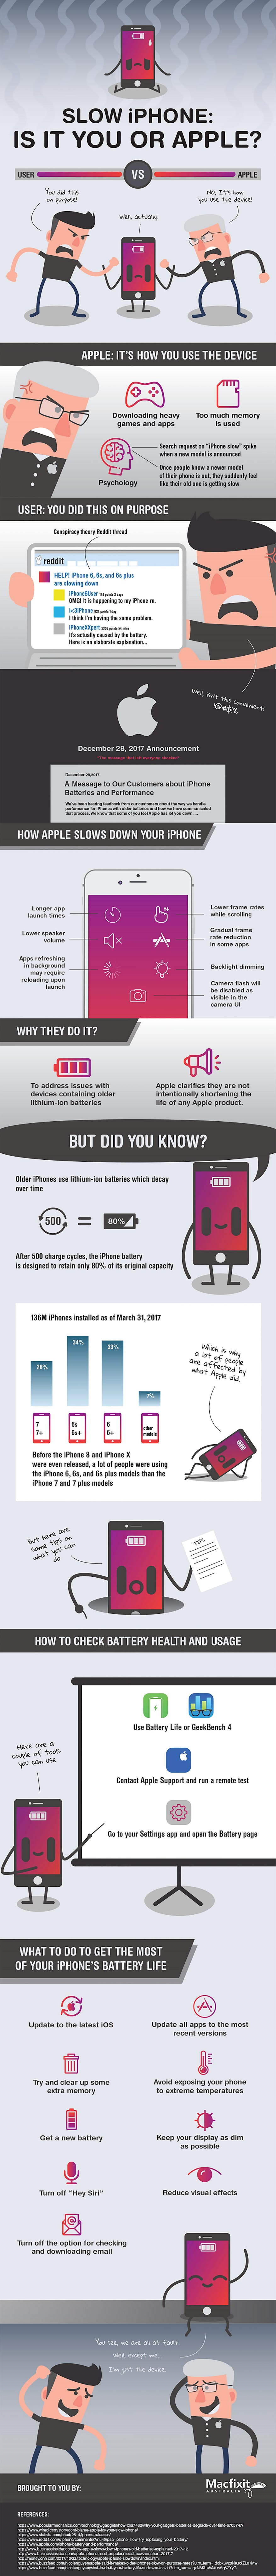 featured image - An Infographic on Things We Despise: Slow iPhones